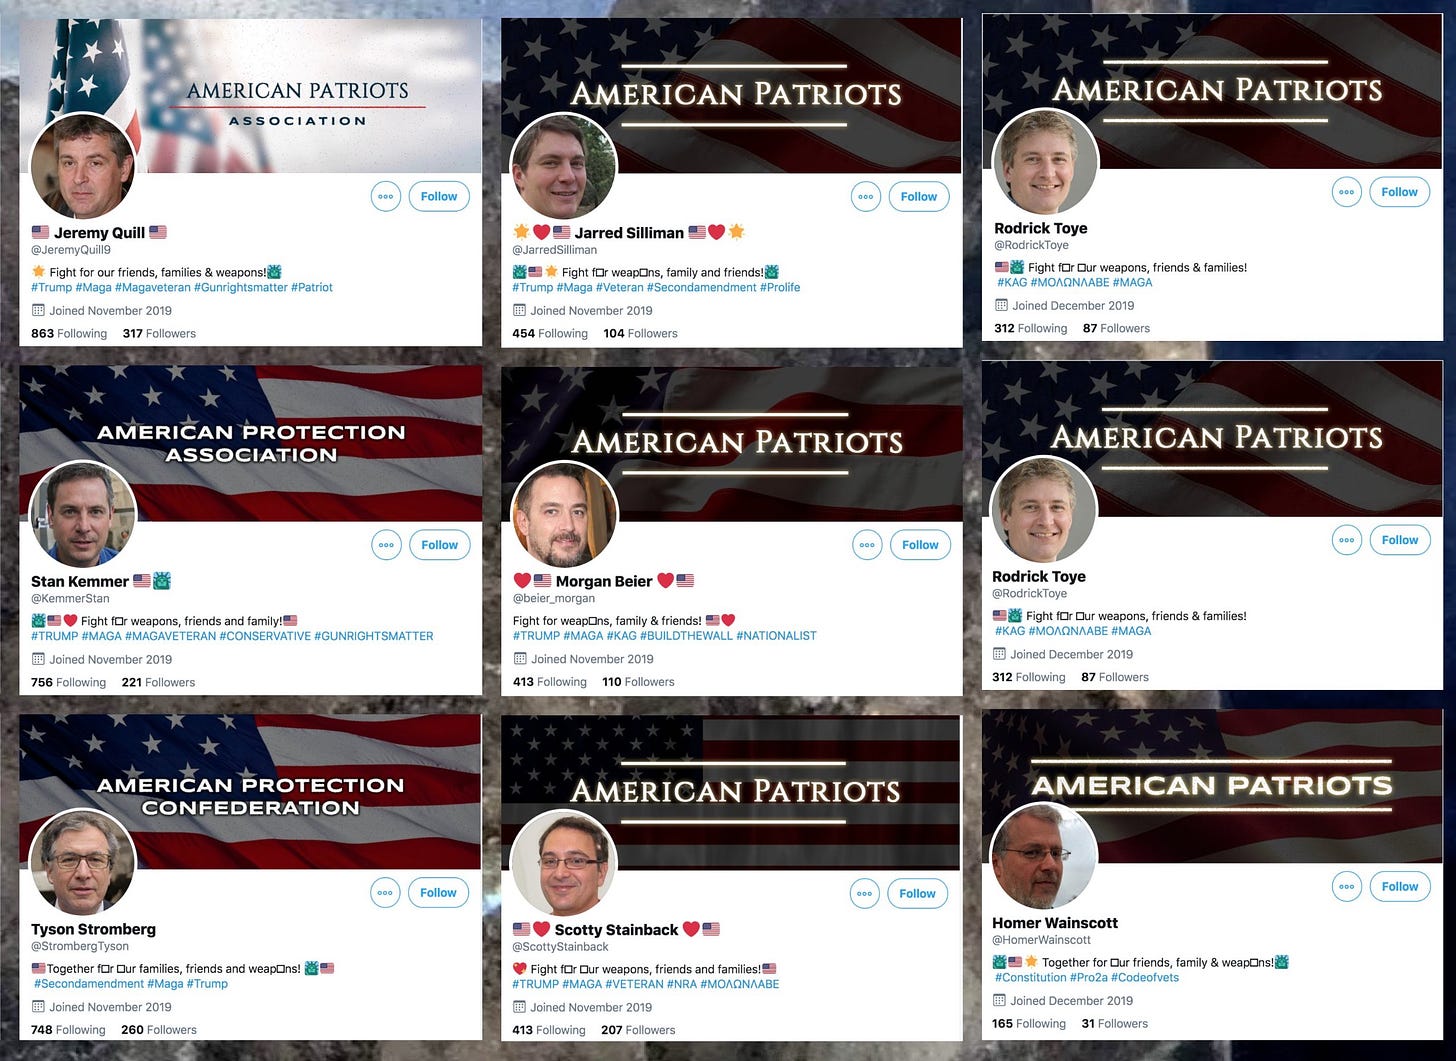 screenshots of the profiles of 9 MAGA Twitter accounts with GAN-generated faces from 2019